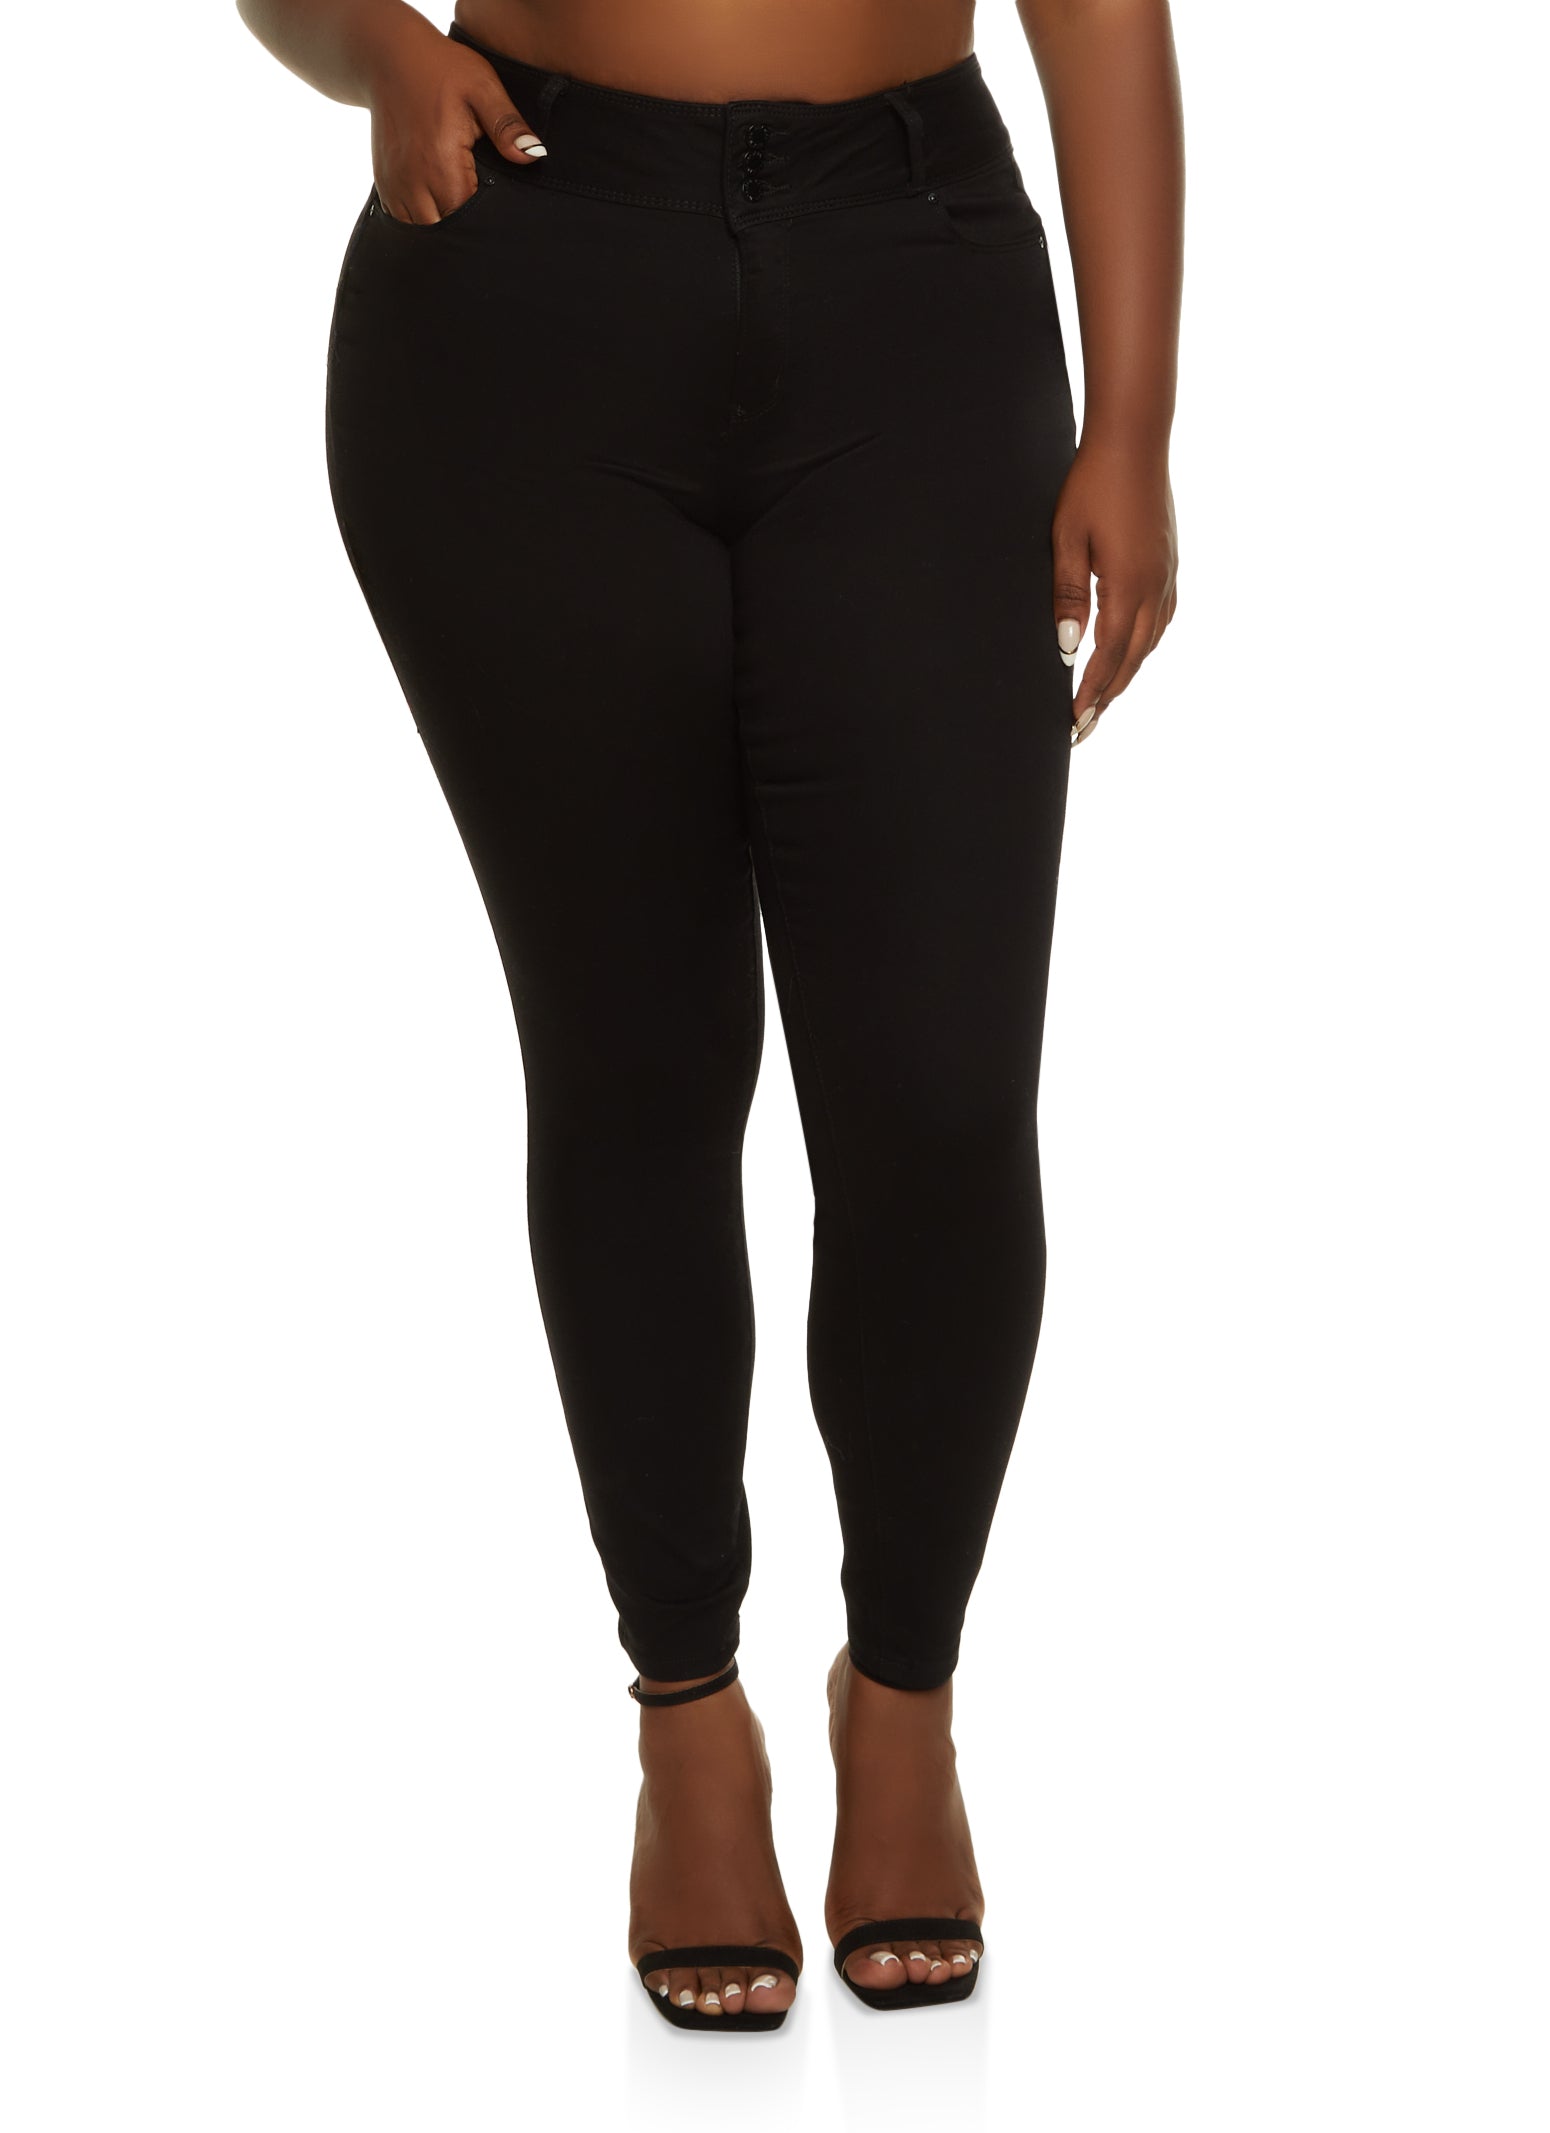 Black Plus Size Clothing, Everyday Low Prices